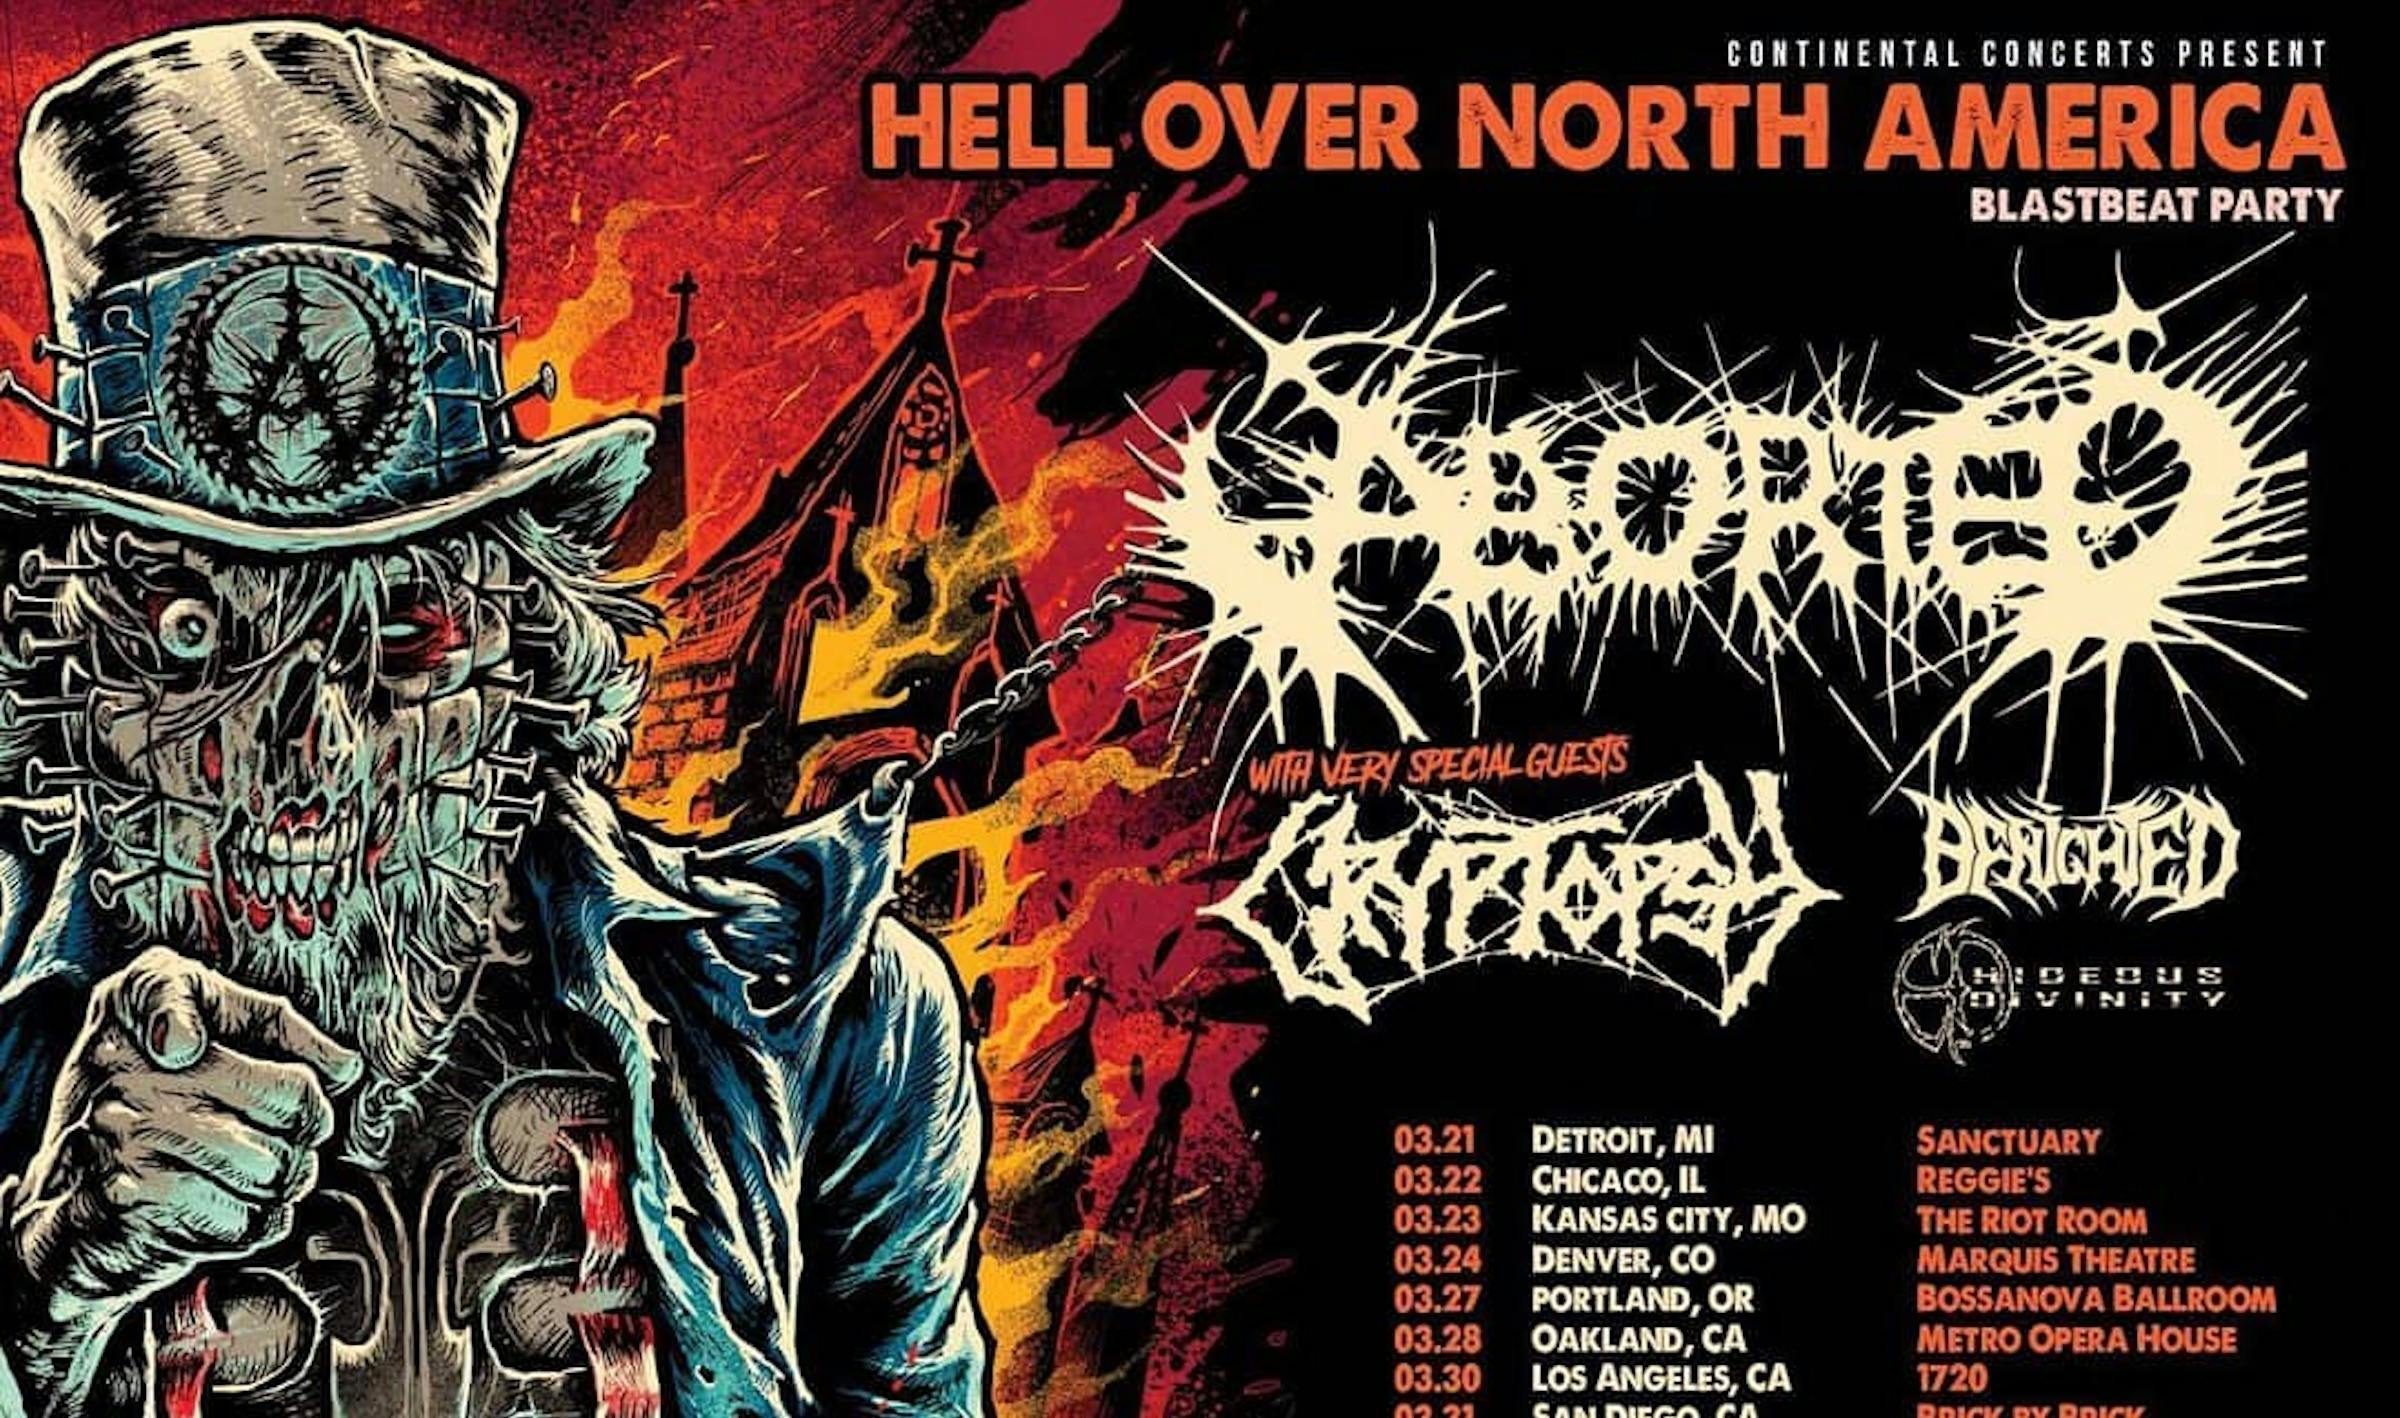 Aborted, Cryptopsy, Benighted, And Hideous Divinity Announce North American Tour